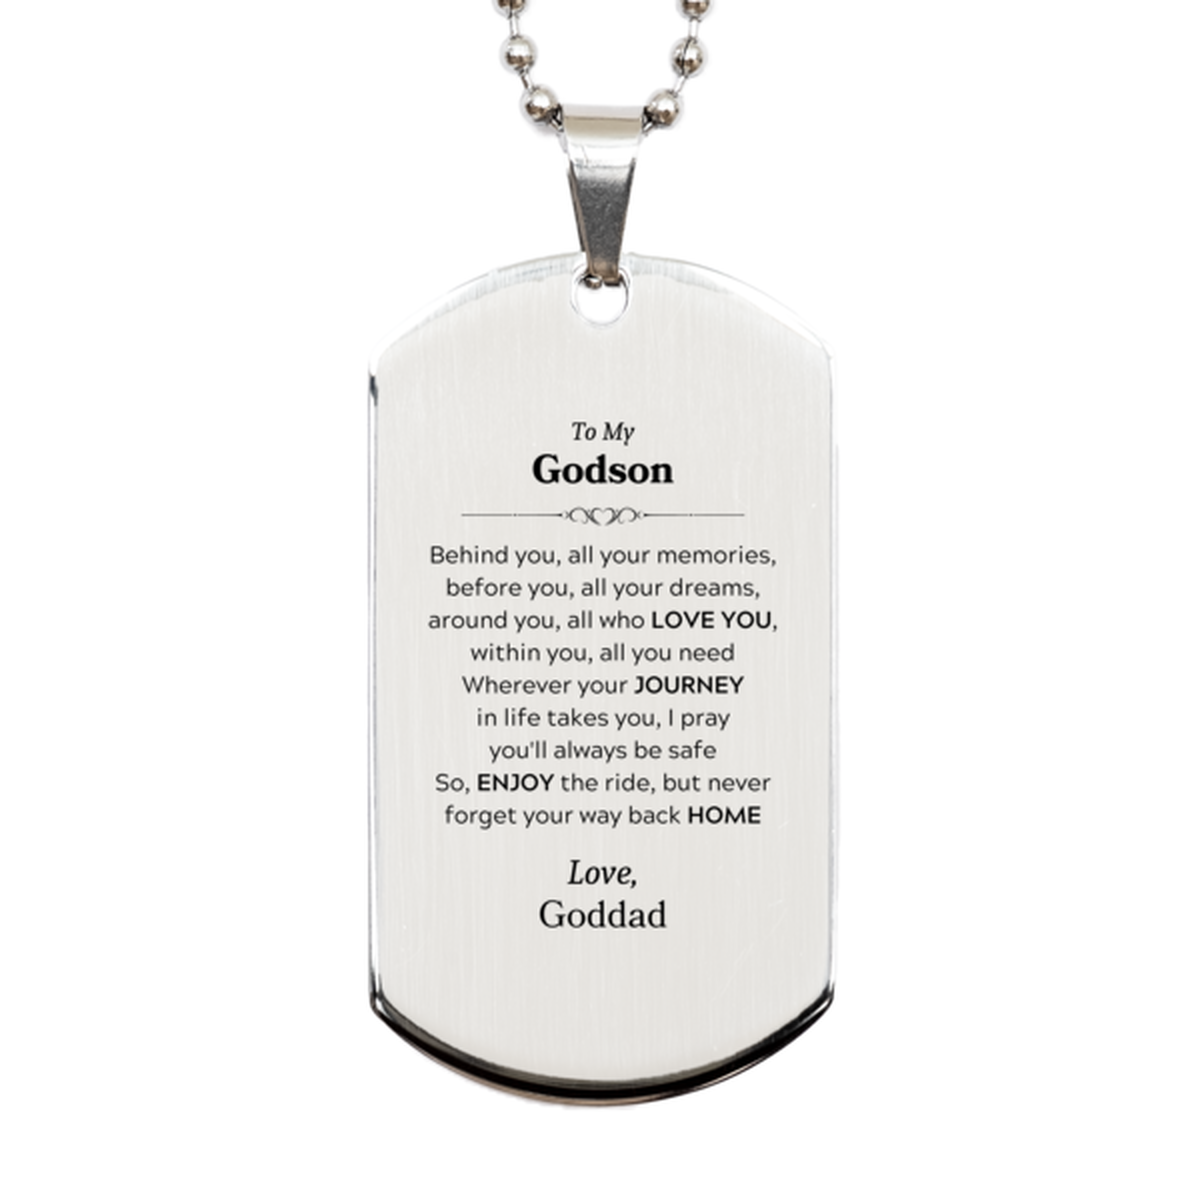 To My Godson Graduation Gifts from Goddad, Godson Silver Dog Tag Christmas Birthday Gifts for Godson Behind you, all your memories, before you, all your dreams. Love, Goddad